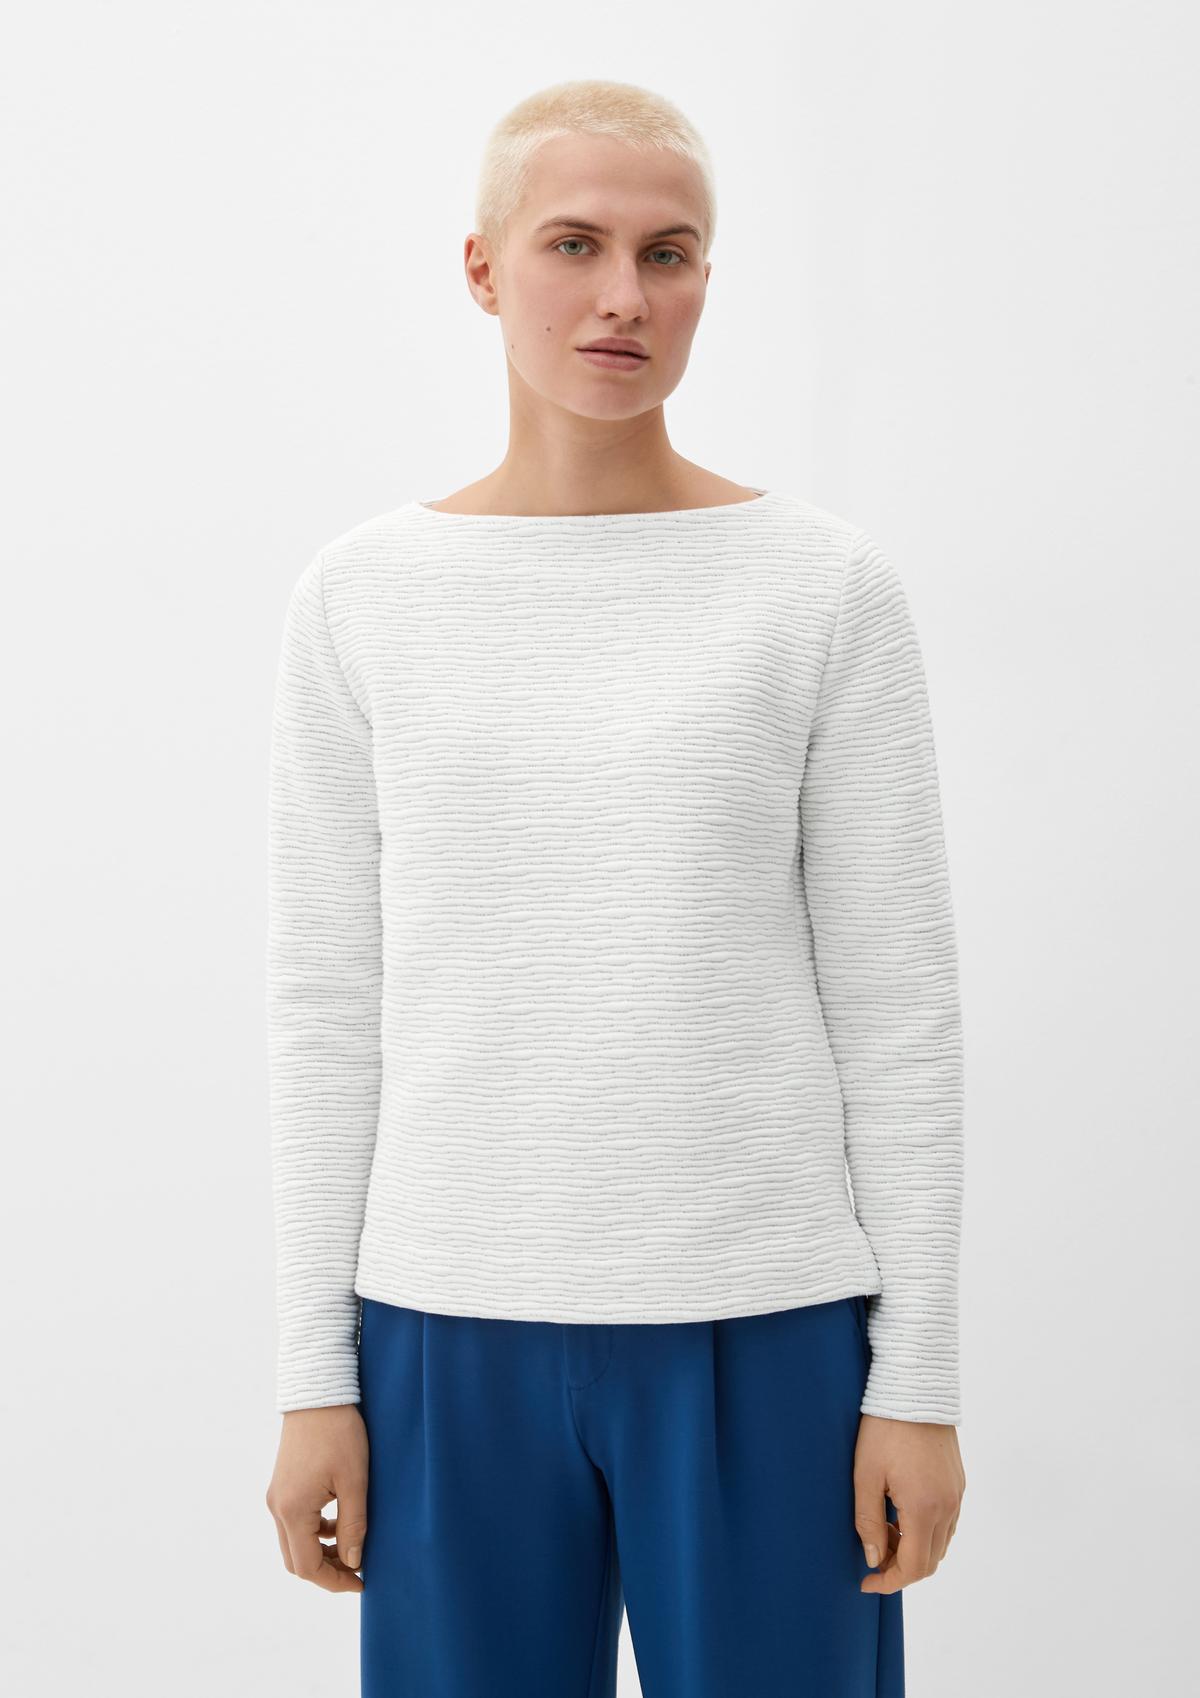 s.Oliver Sweatshirt with a patterned texture